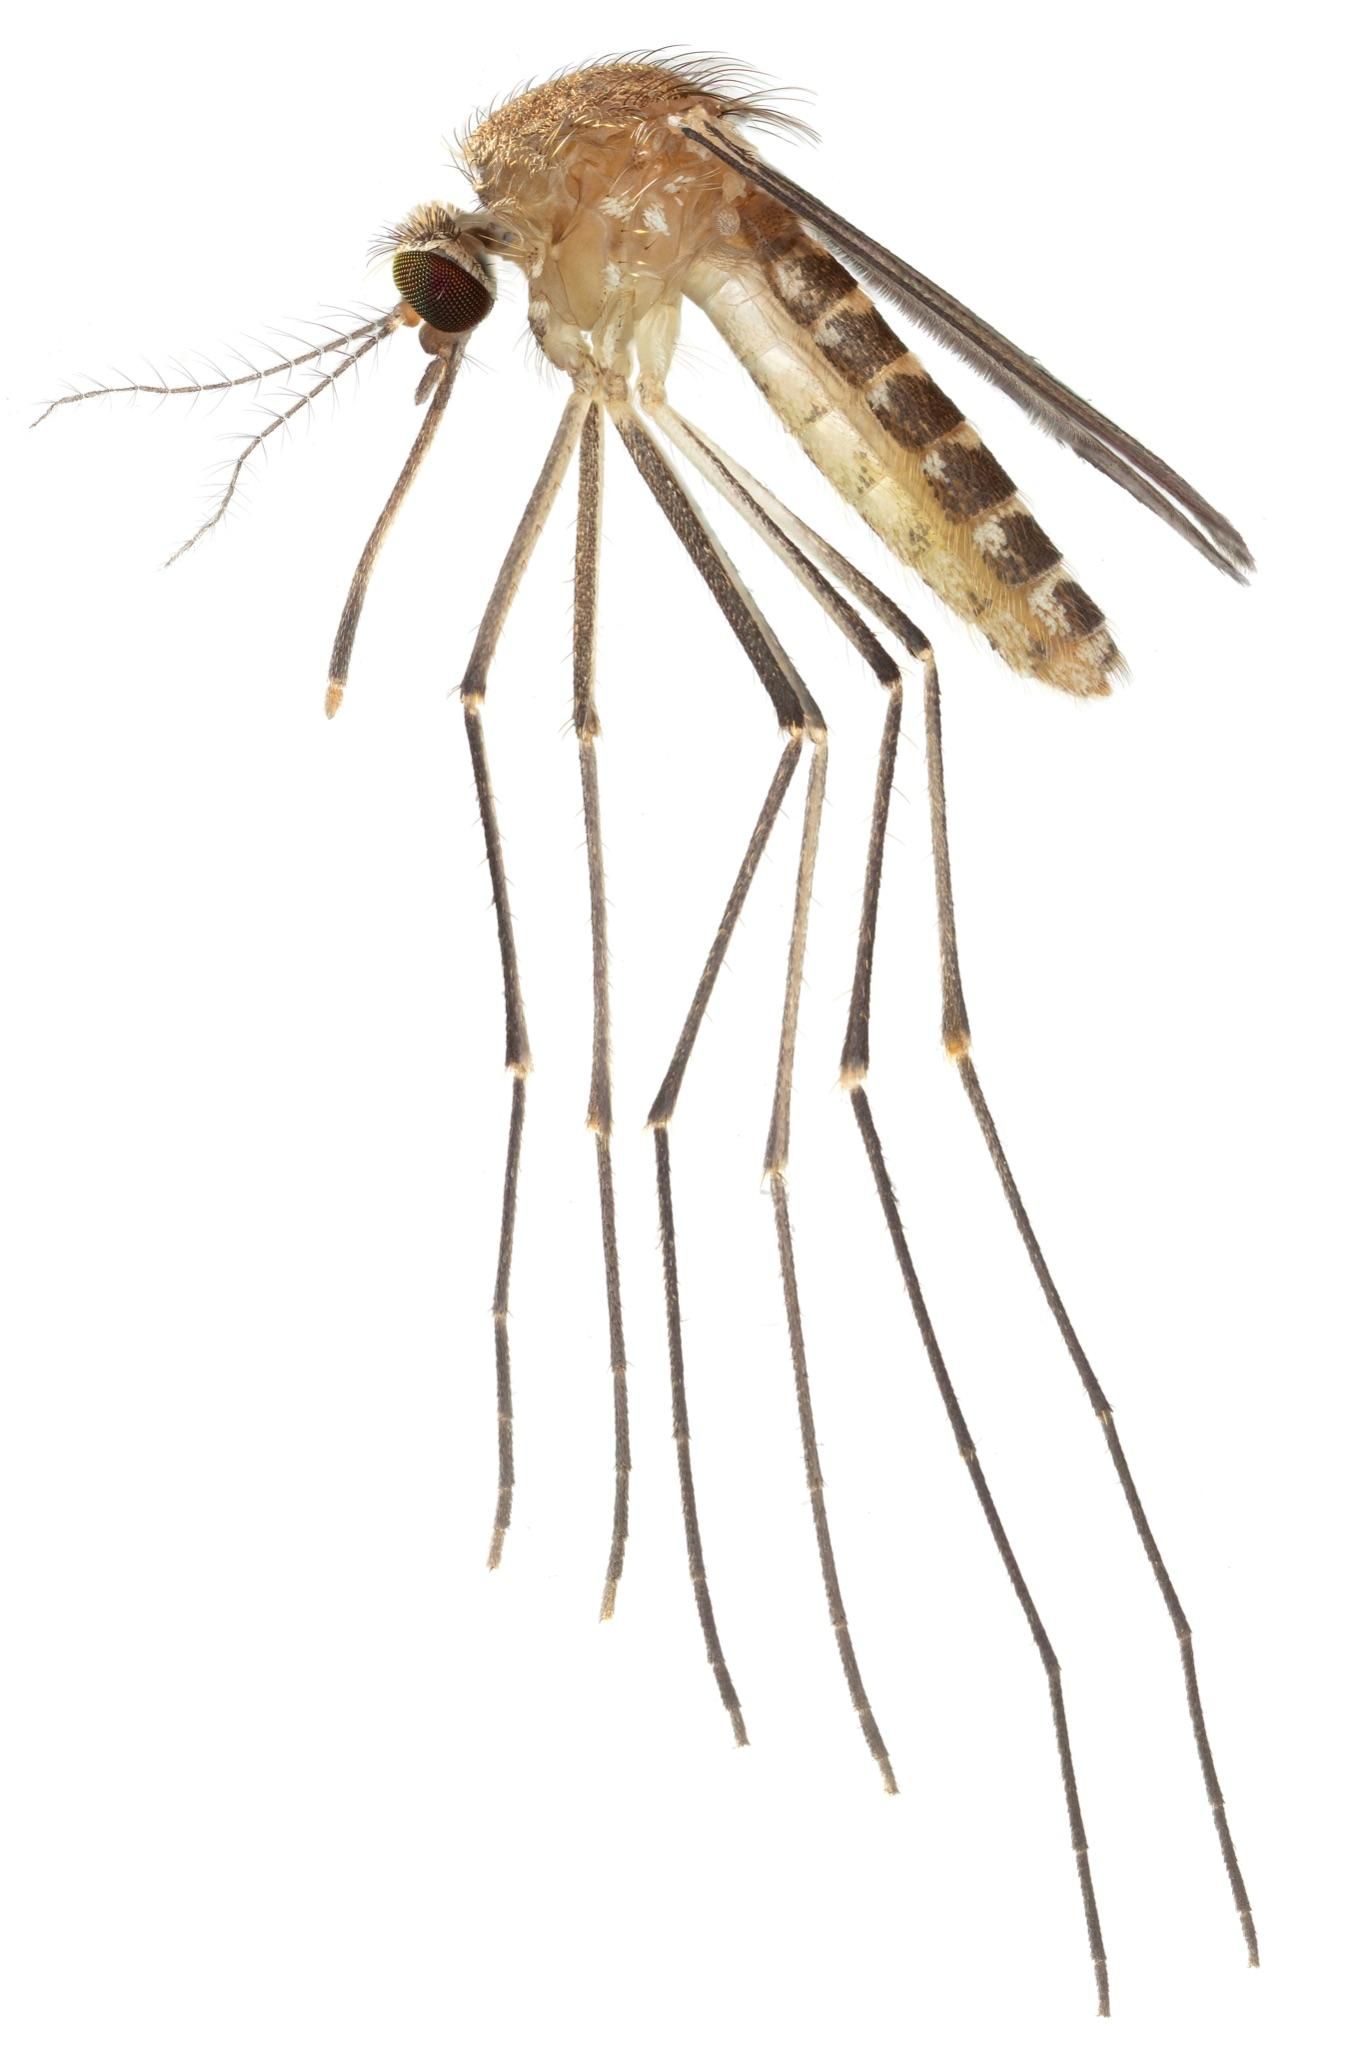 Adult female Culex quinquefasciatus, an important vector of West Nile virus in the United States, collected in Indian River County, Florida. 